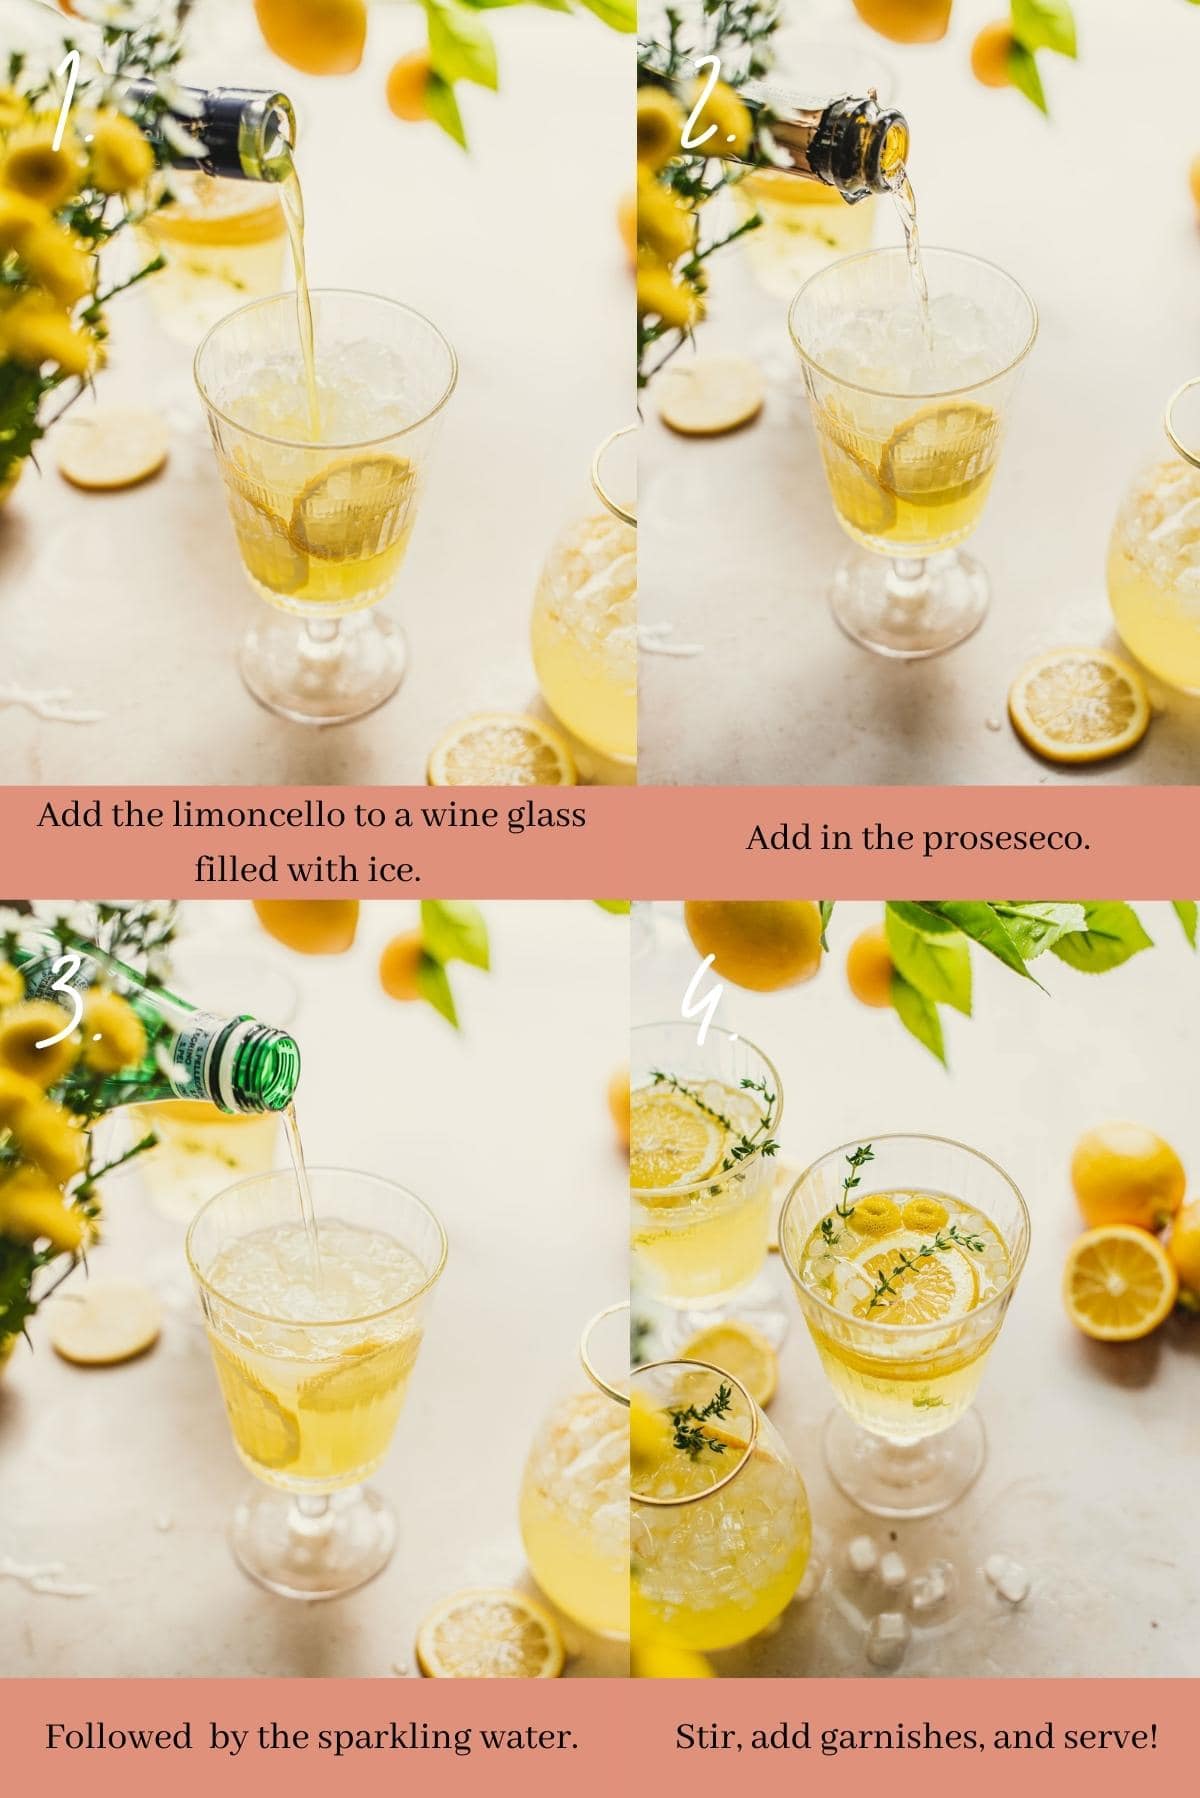 Collage showing the steps to make limoncello spritzer